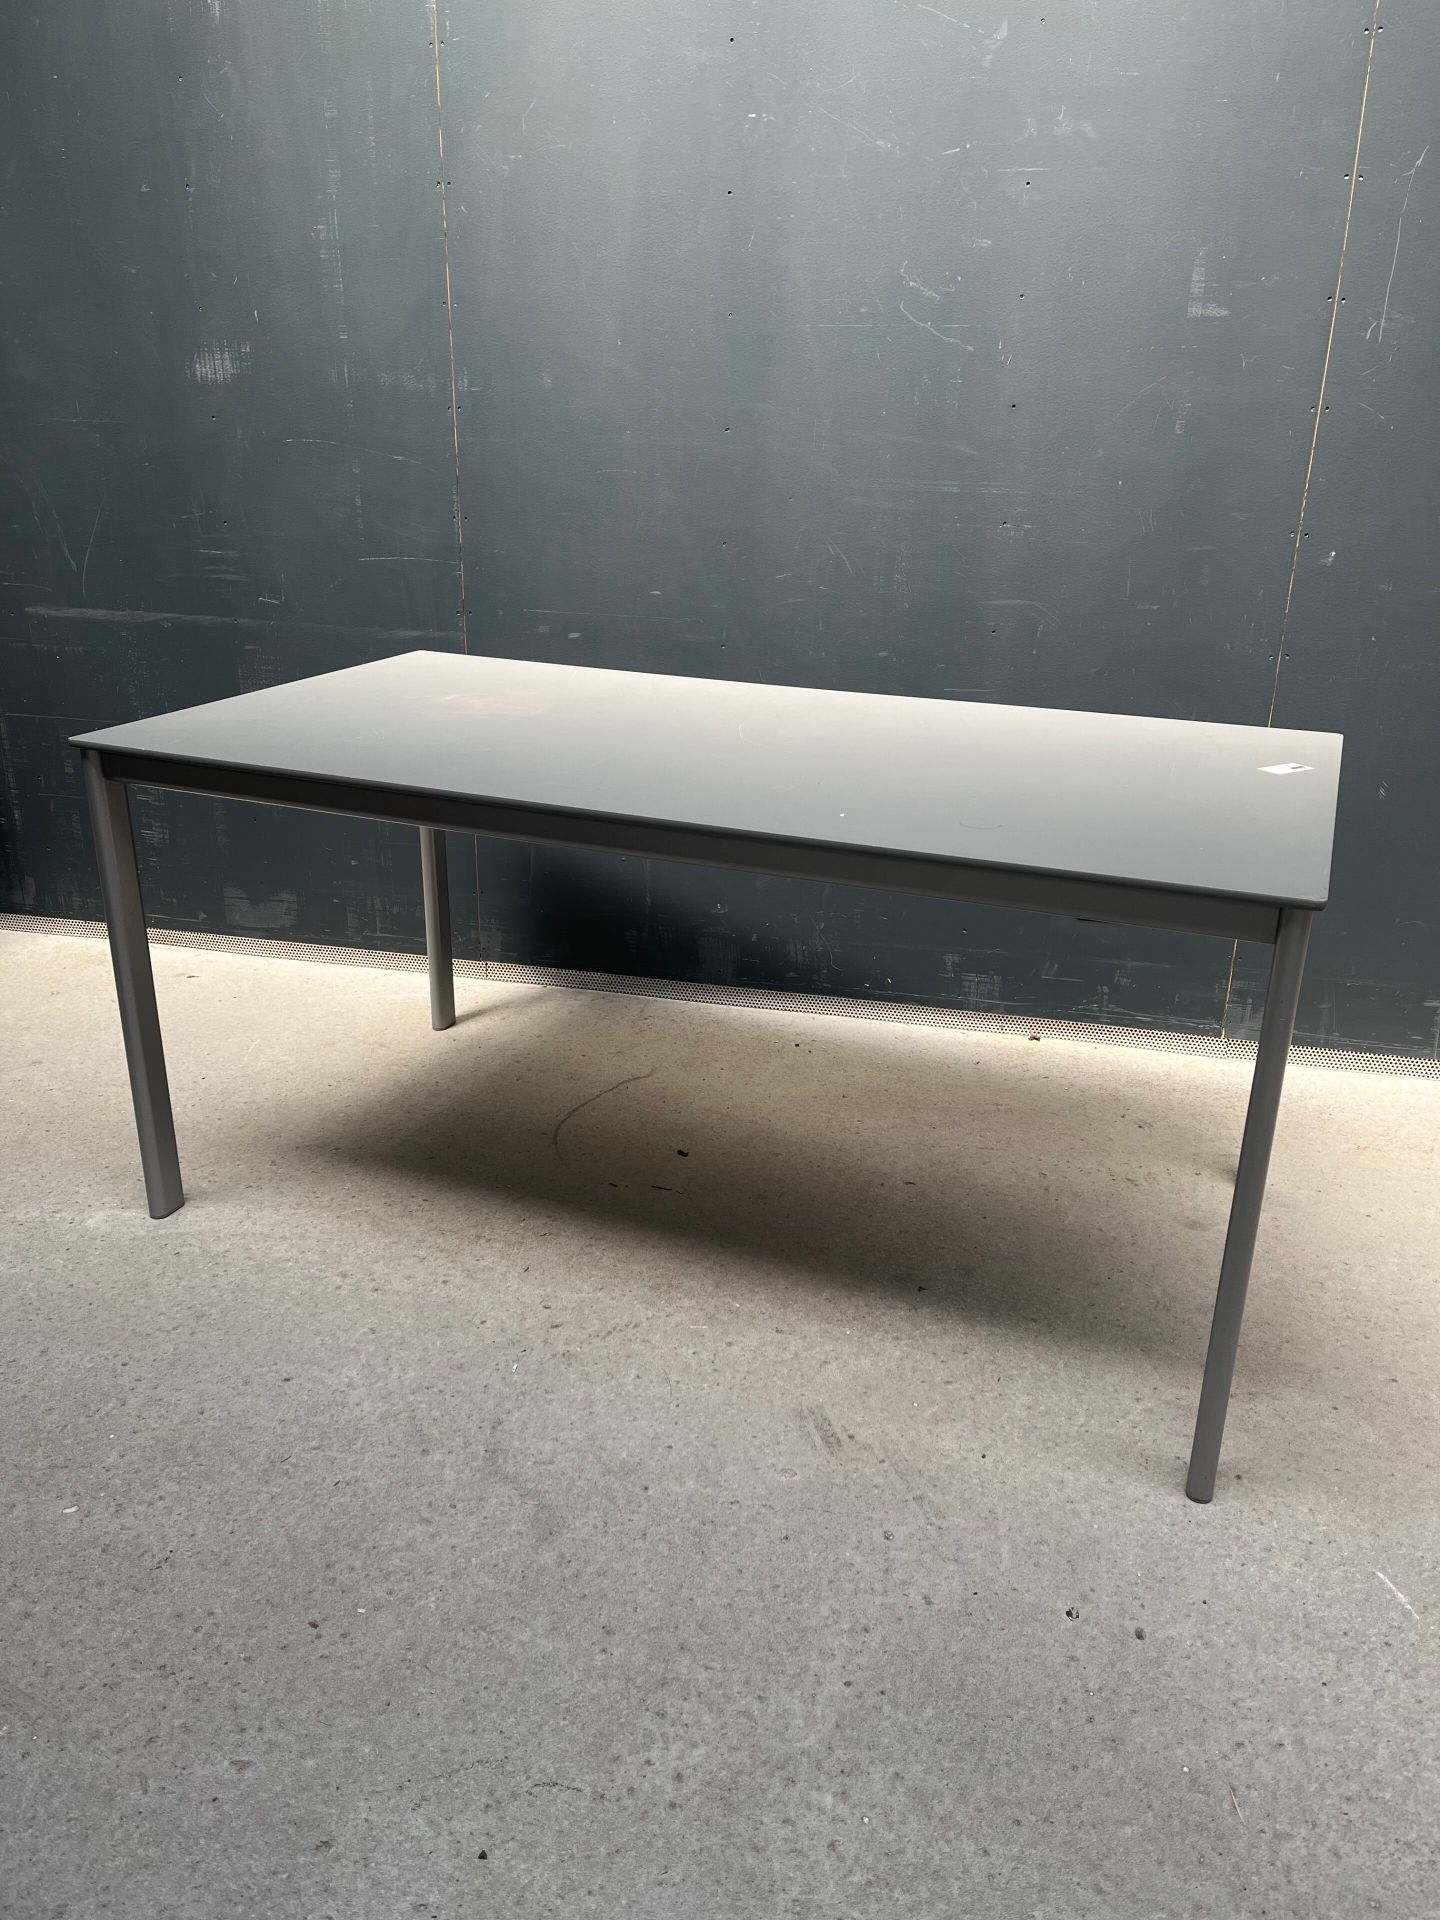 Null Grey anodized metal rectangular table

Scratches and restoration